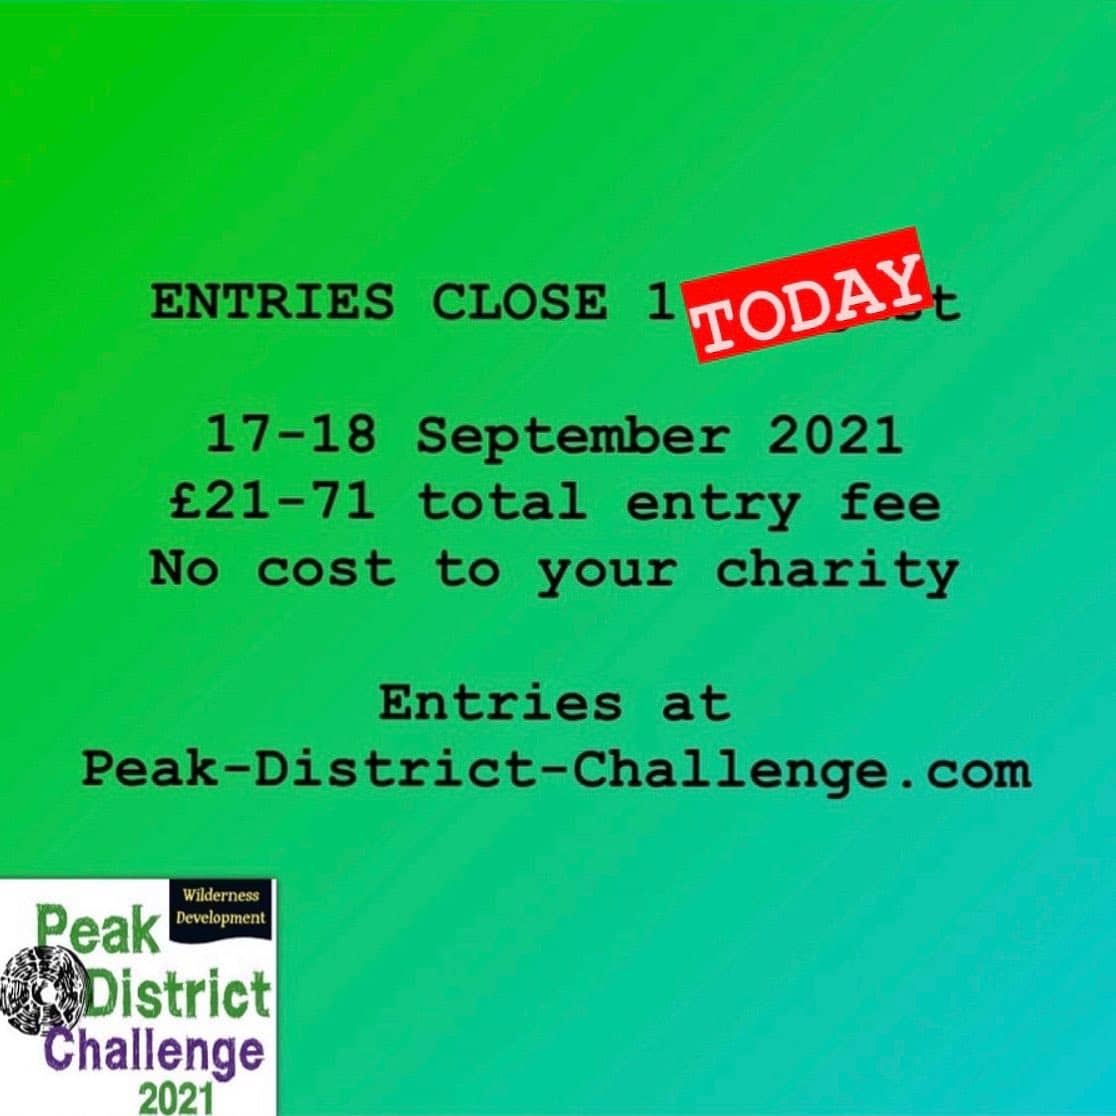 ENTRIES CLOSE TODAY

Don’t miss out, sign up now at Peak-District-Challenge.com

Book with Wilder...